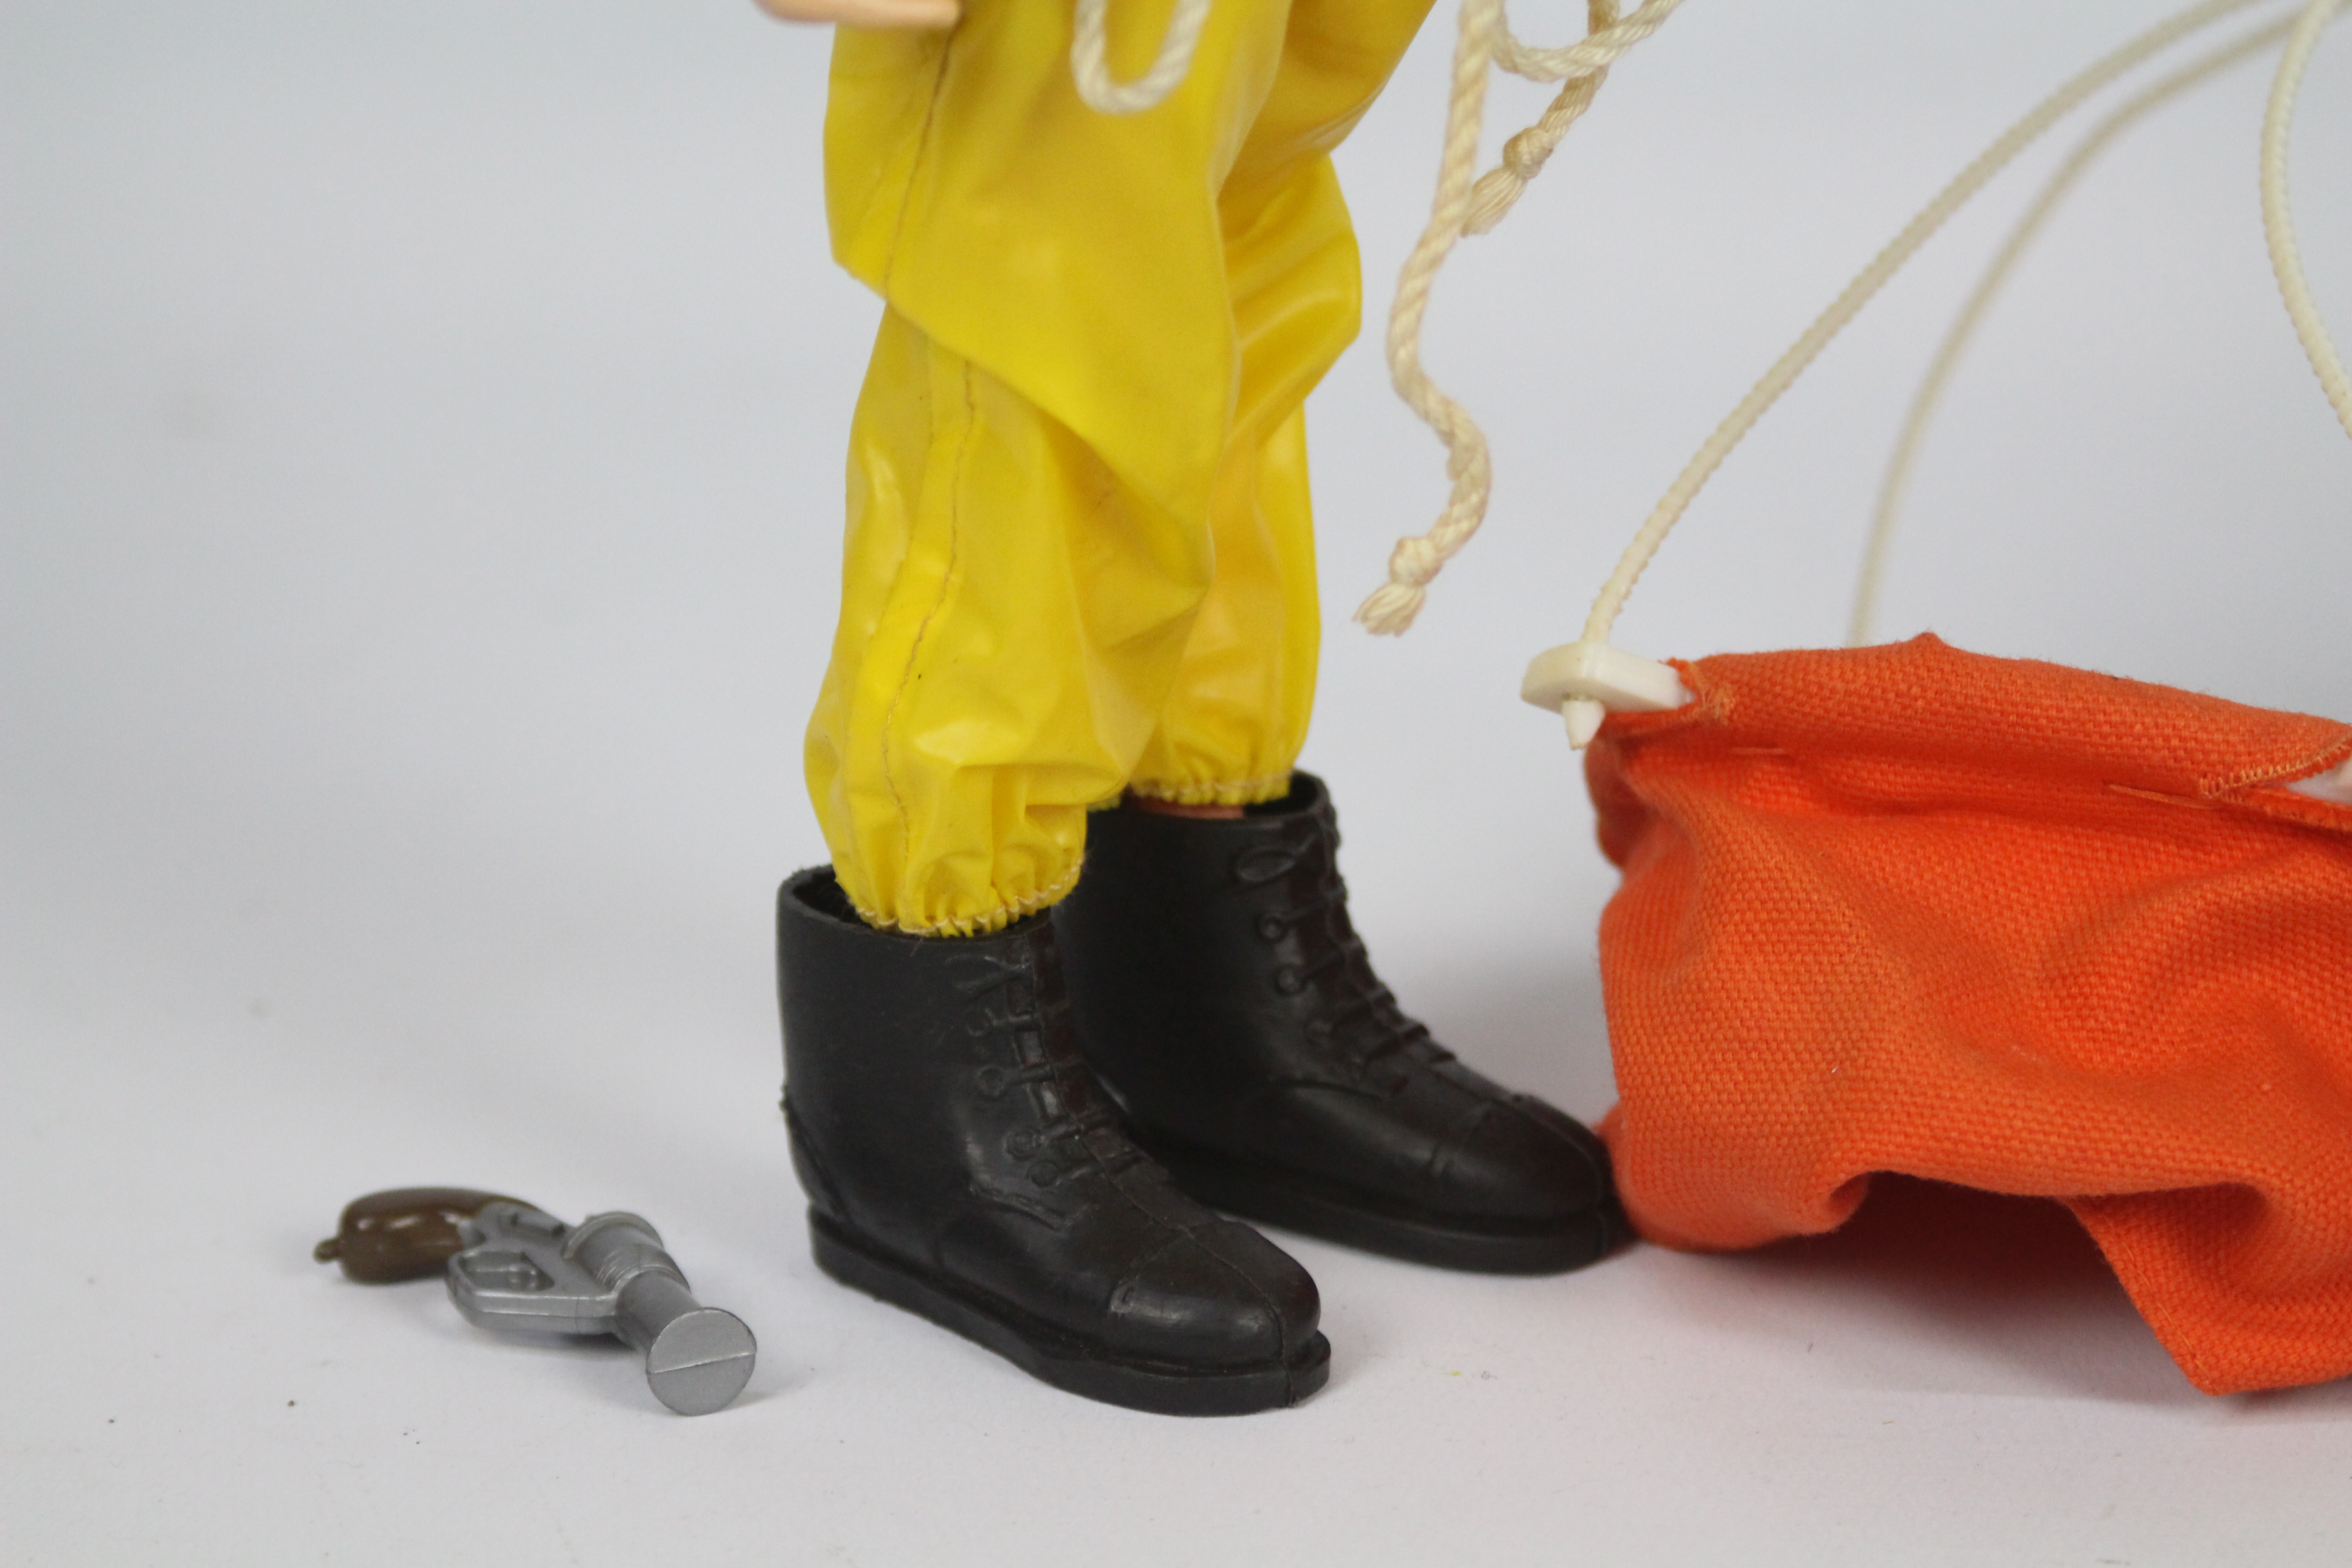 Palitoy, Action Man - A Palitoy Action Man figure in R.N.L.I. Sea Rescue outfit. - Image 8 of 10